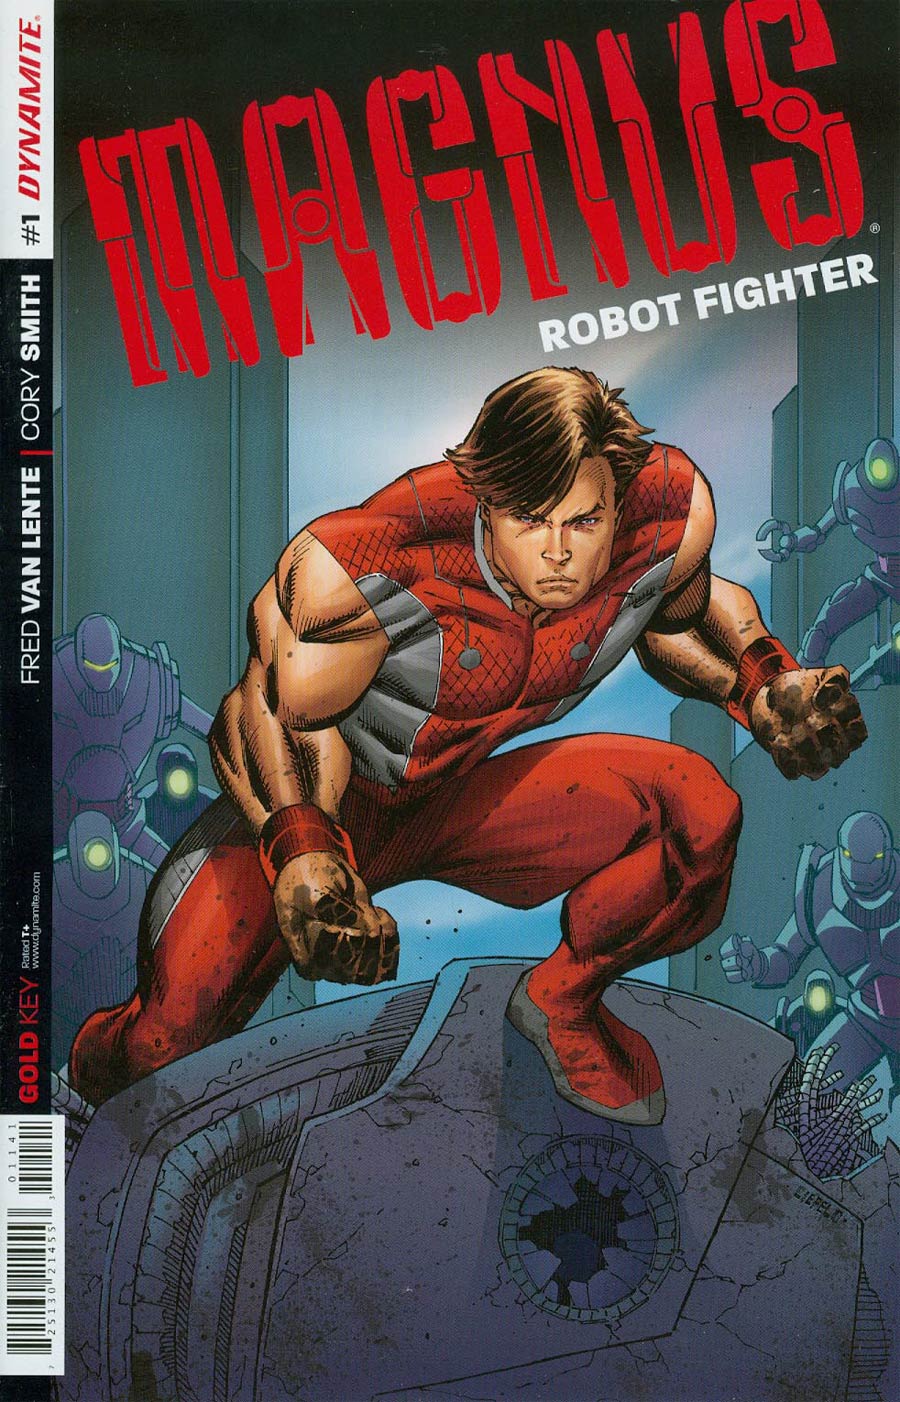 Magnus Robot Fighter Vol 4 #1 Cover F Variant Rob Liefeld Cover